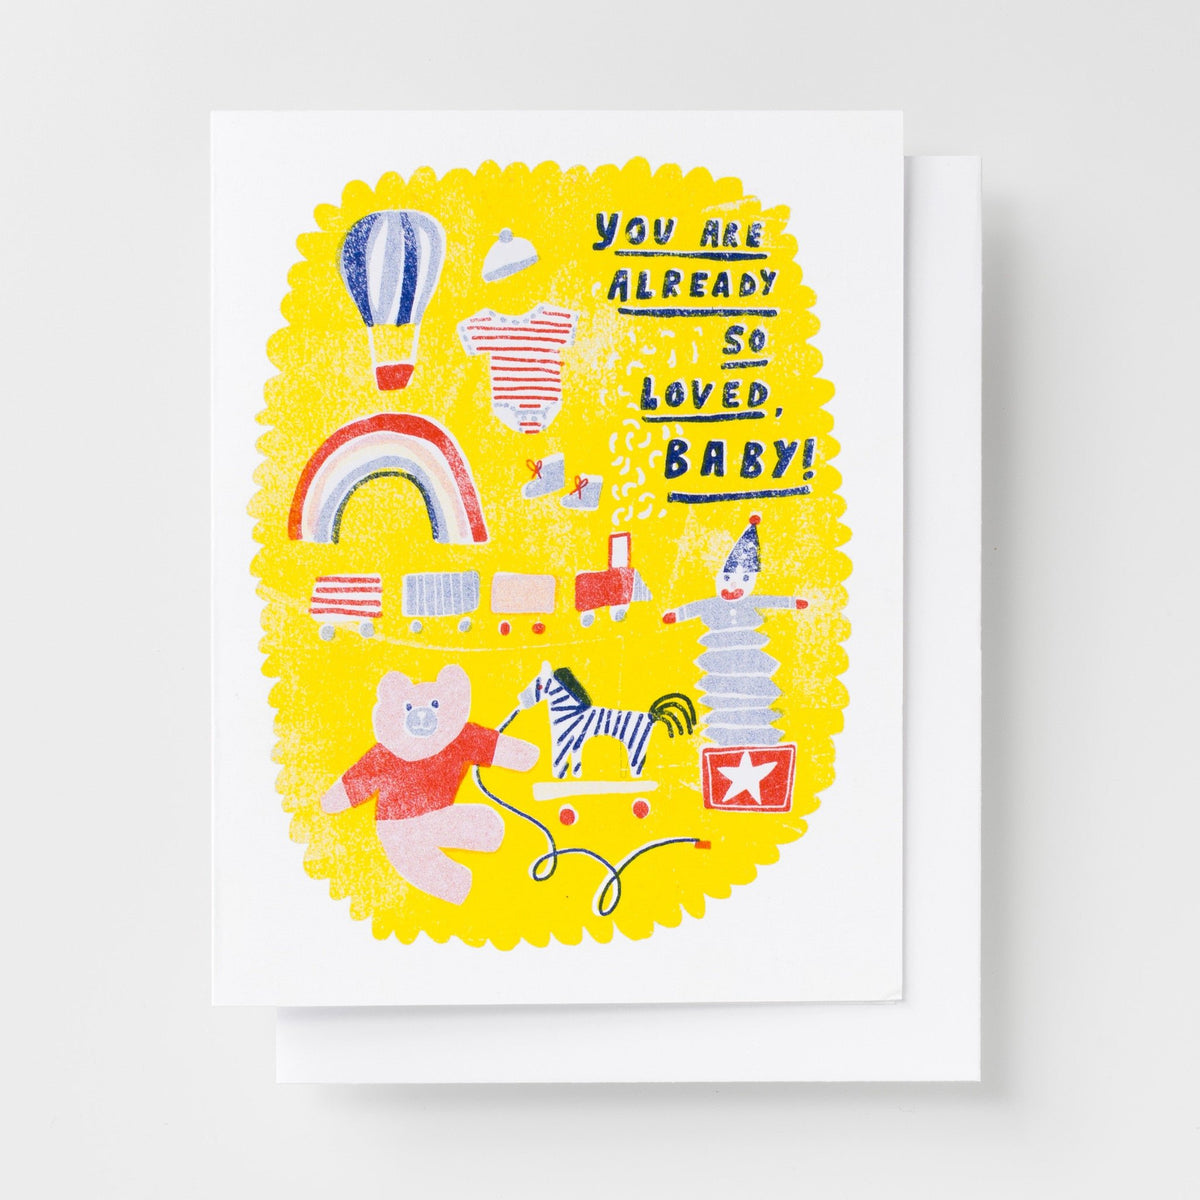 So Loved, Baby - Risograph Card - Yellow Owl Workshop